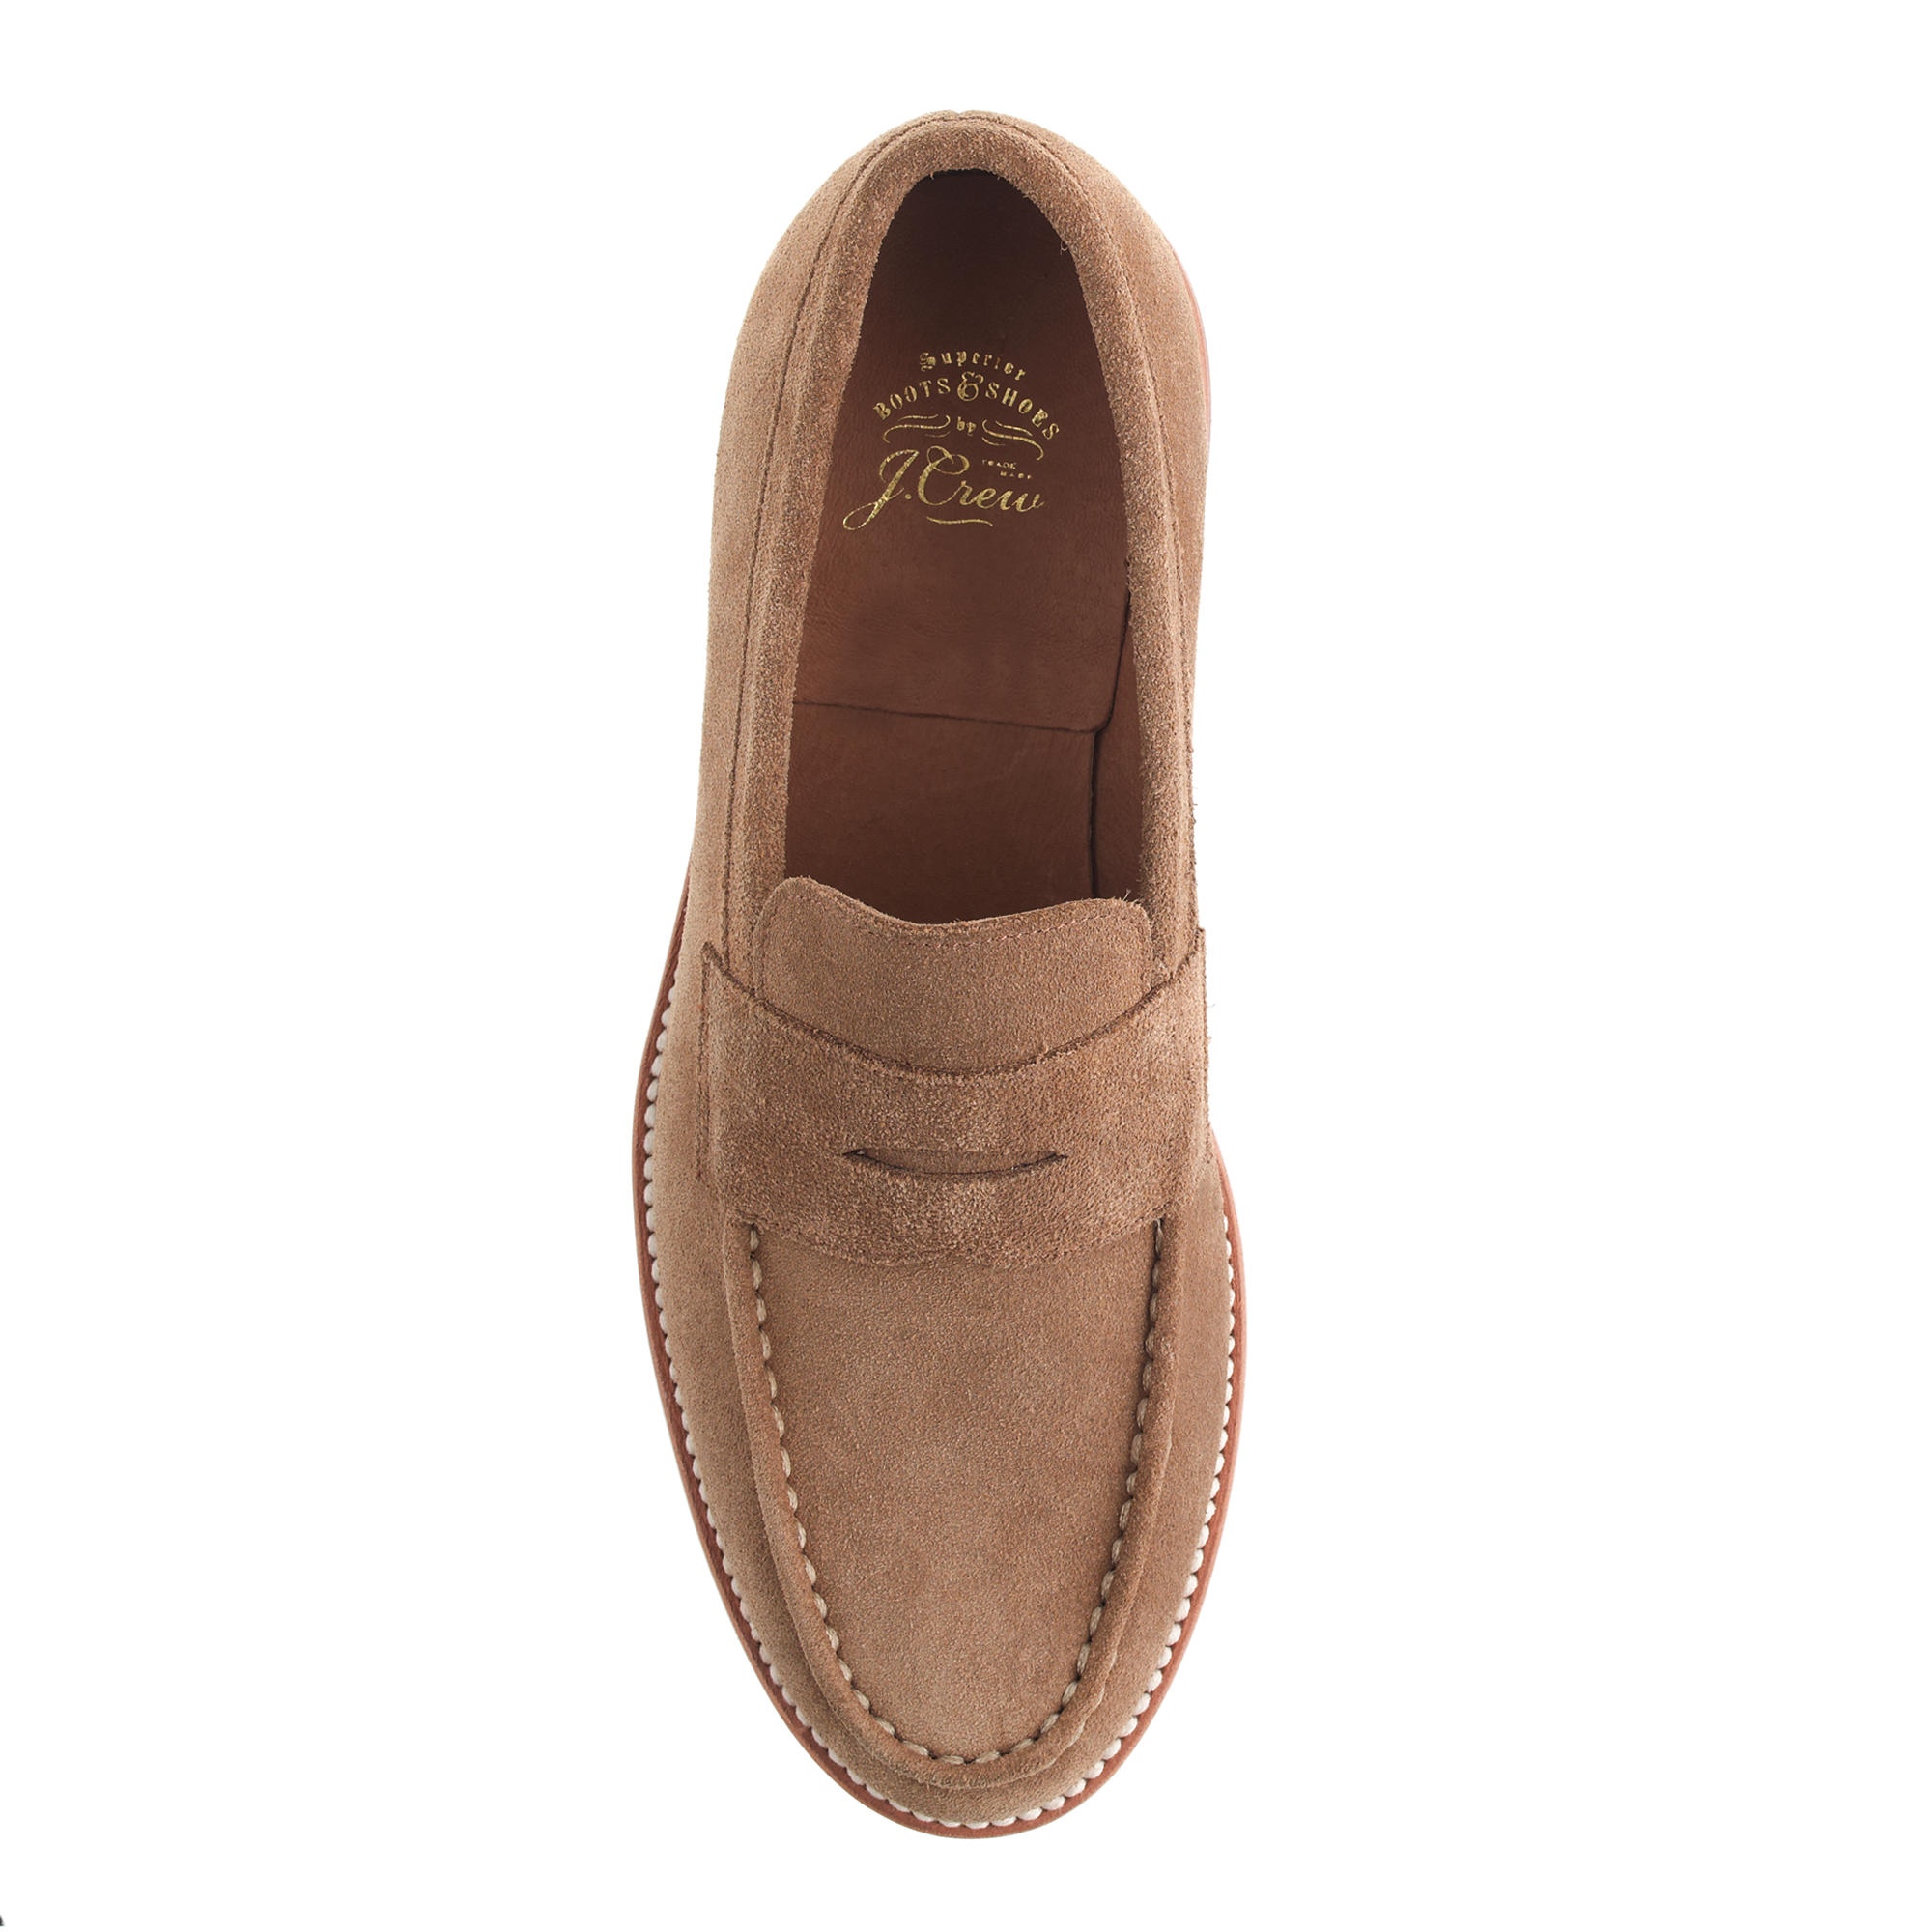 J.crew Kenton Suede Penny Loafers in Brown for Men (sahara) Save 3